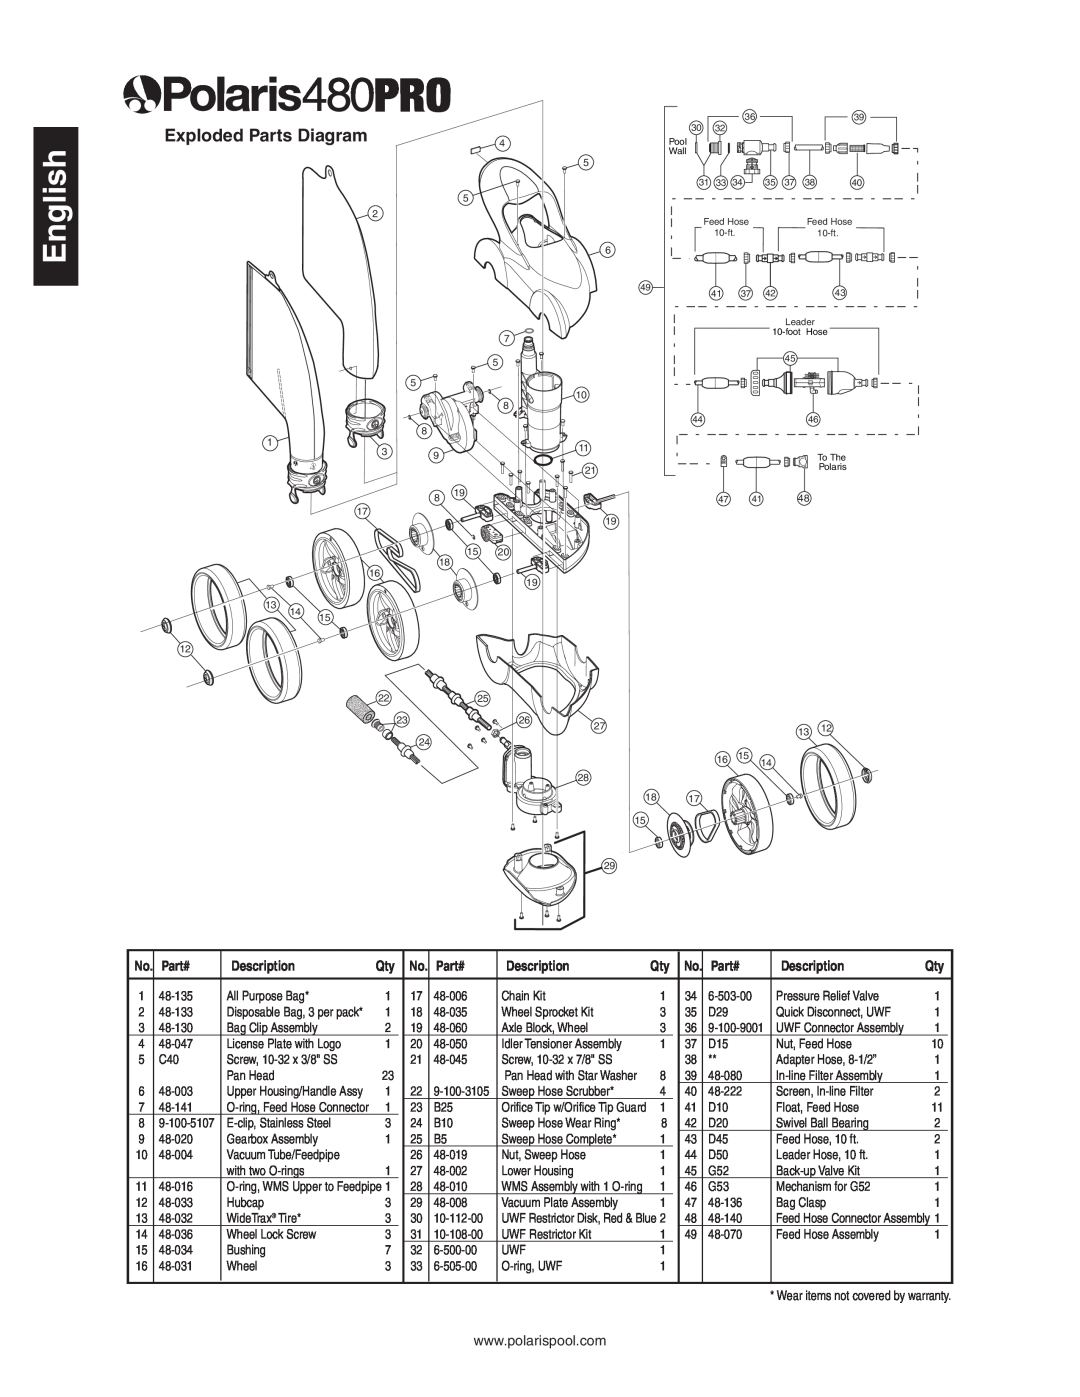 Sony 480 owner manual Exploded Parts Diagram, English, Part#, Description 